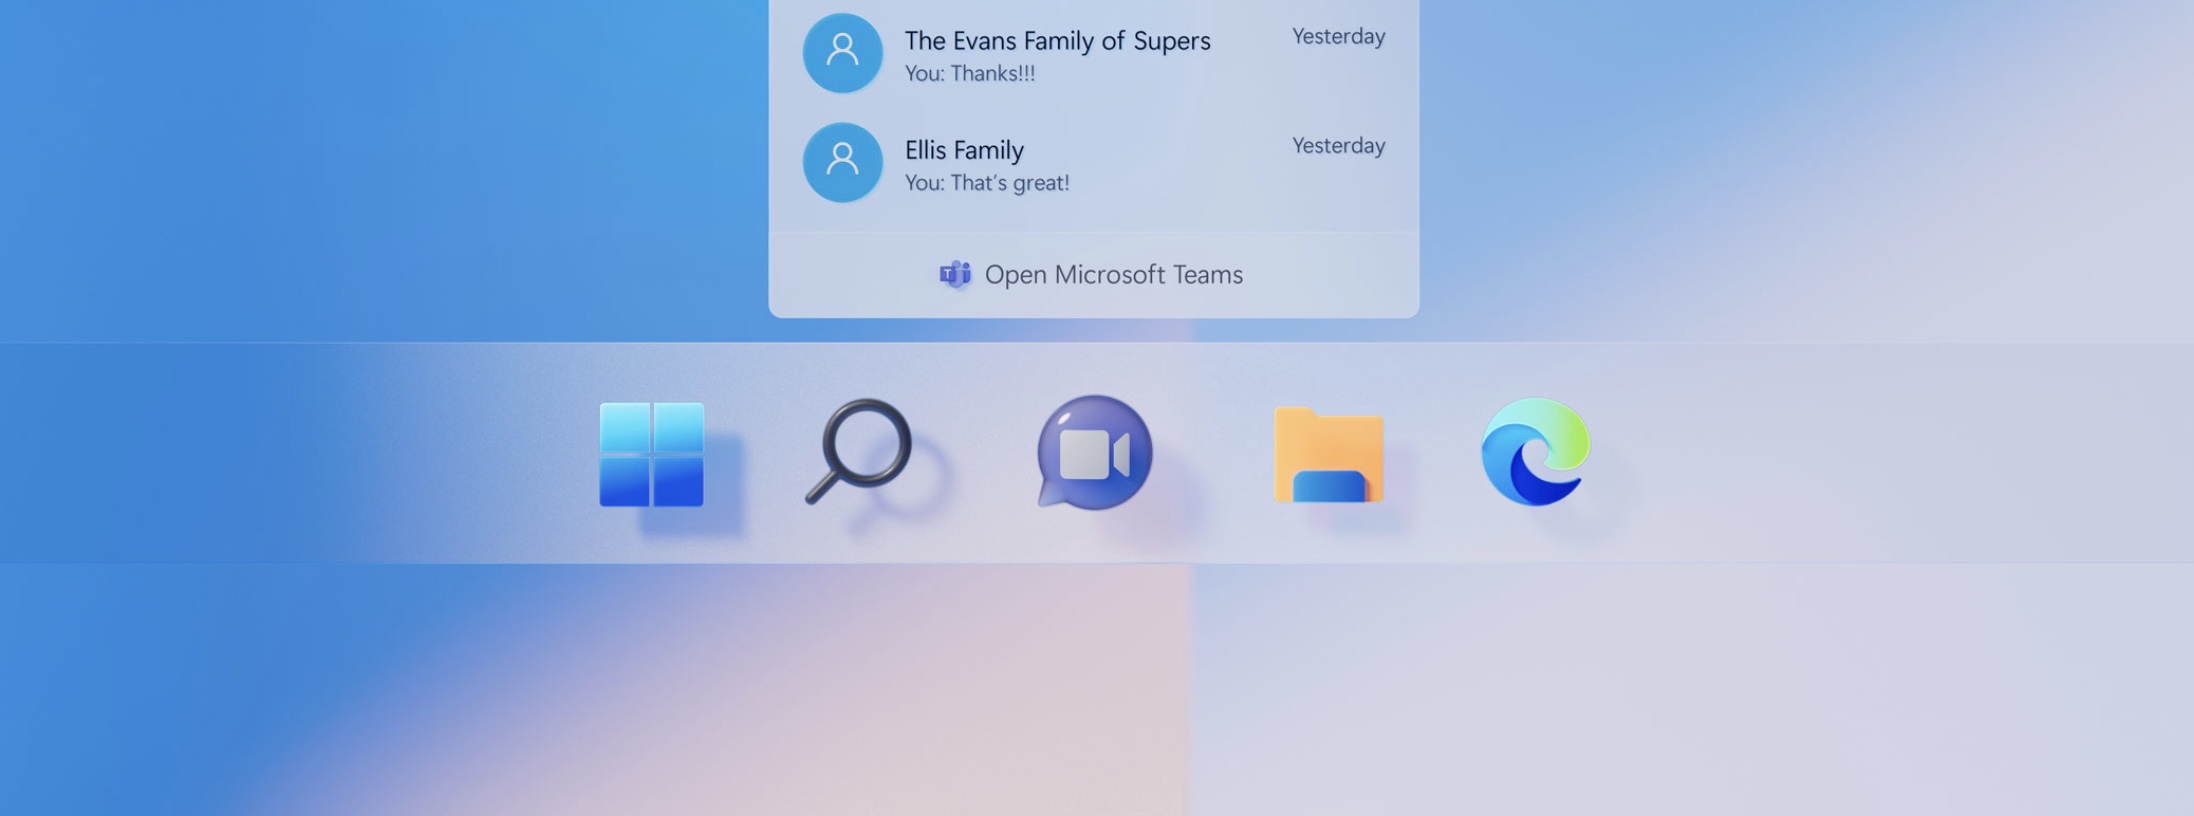 Microsoft unveils Windows 11 with macOS-style Dock, new